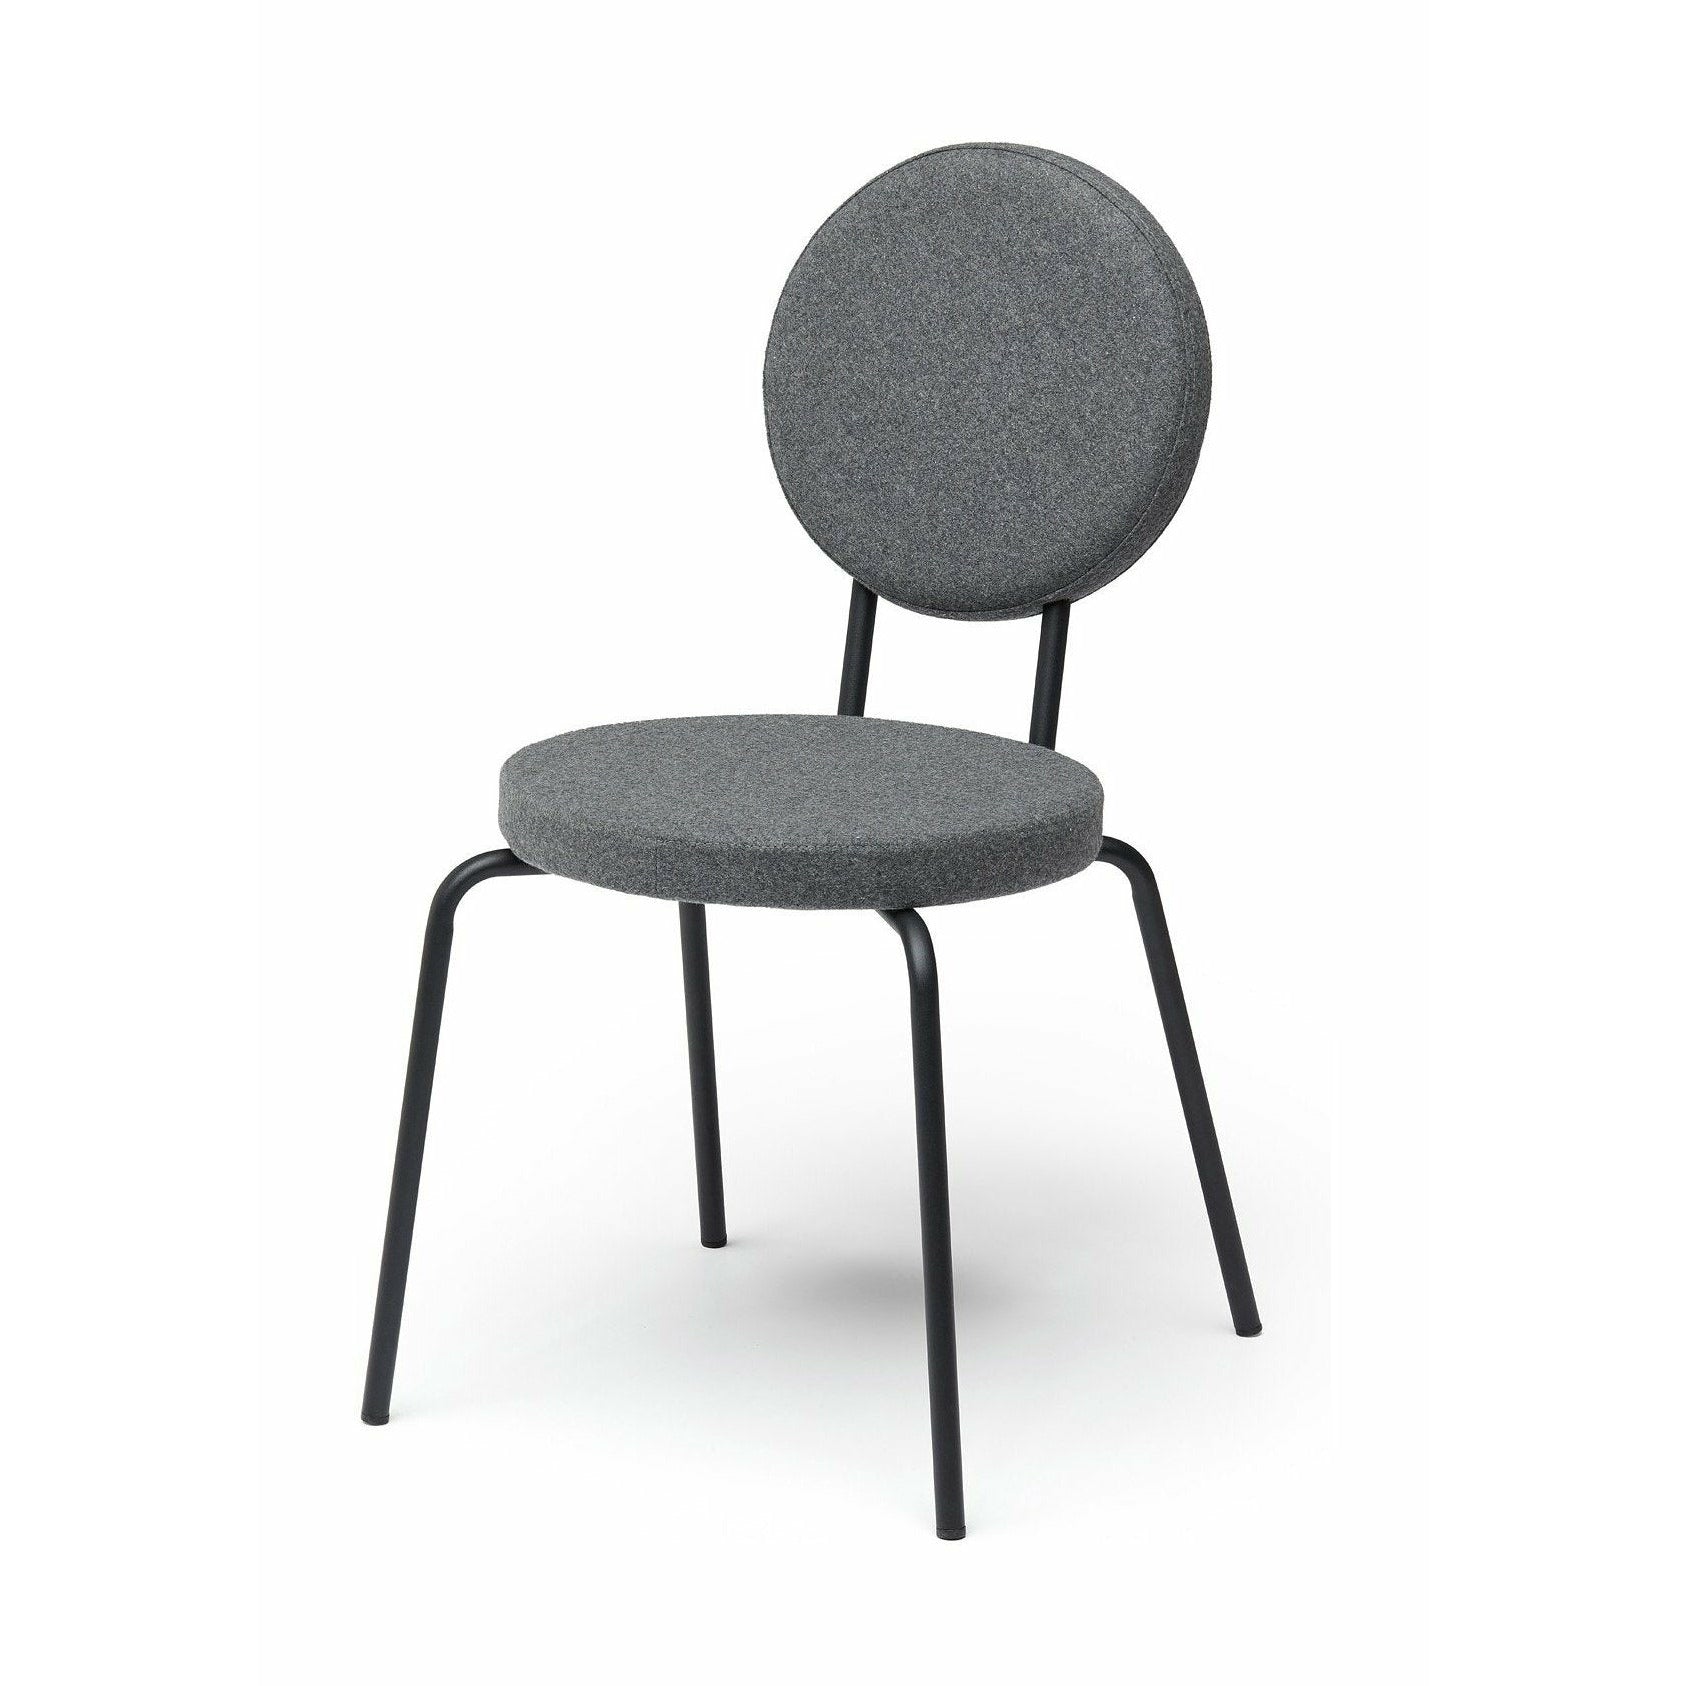 Puik Option Chair Seat And Backrest Round, Light Grey